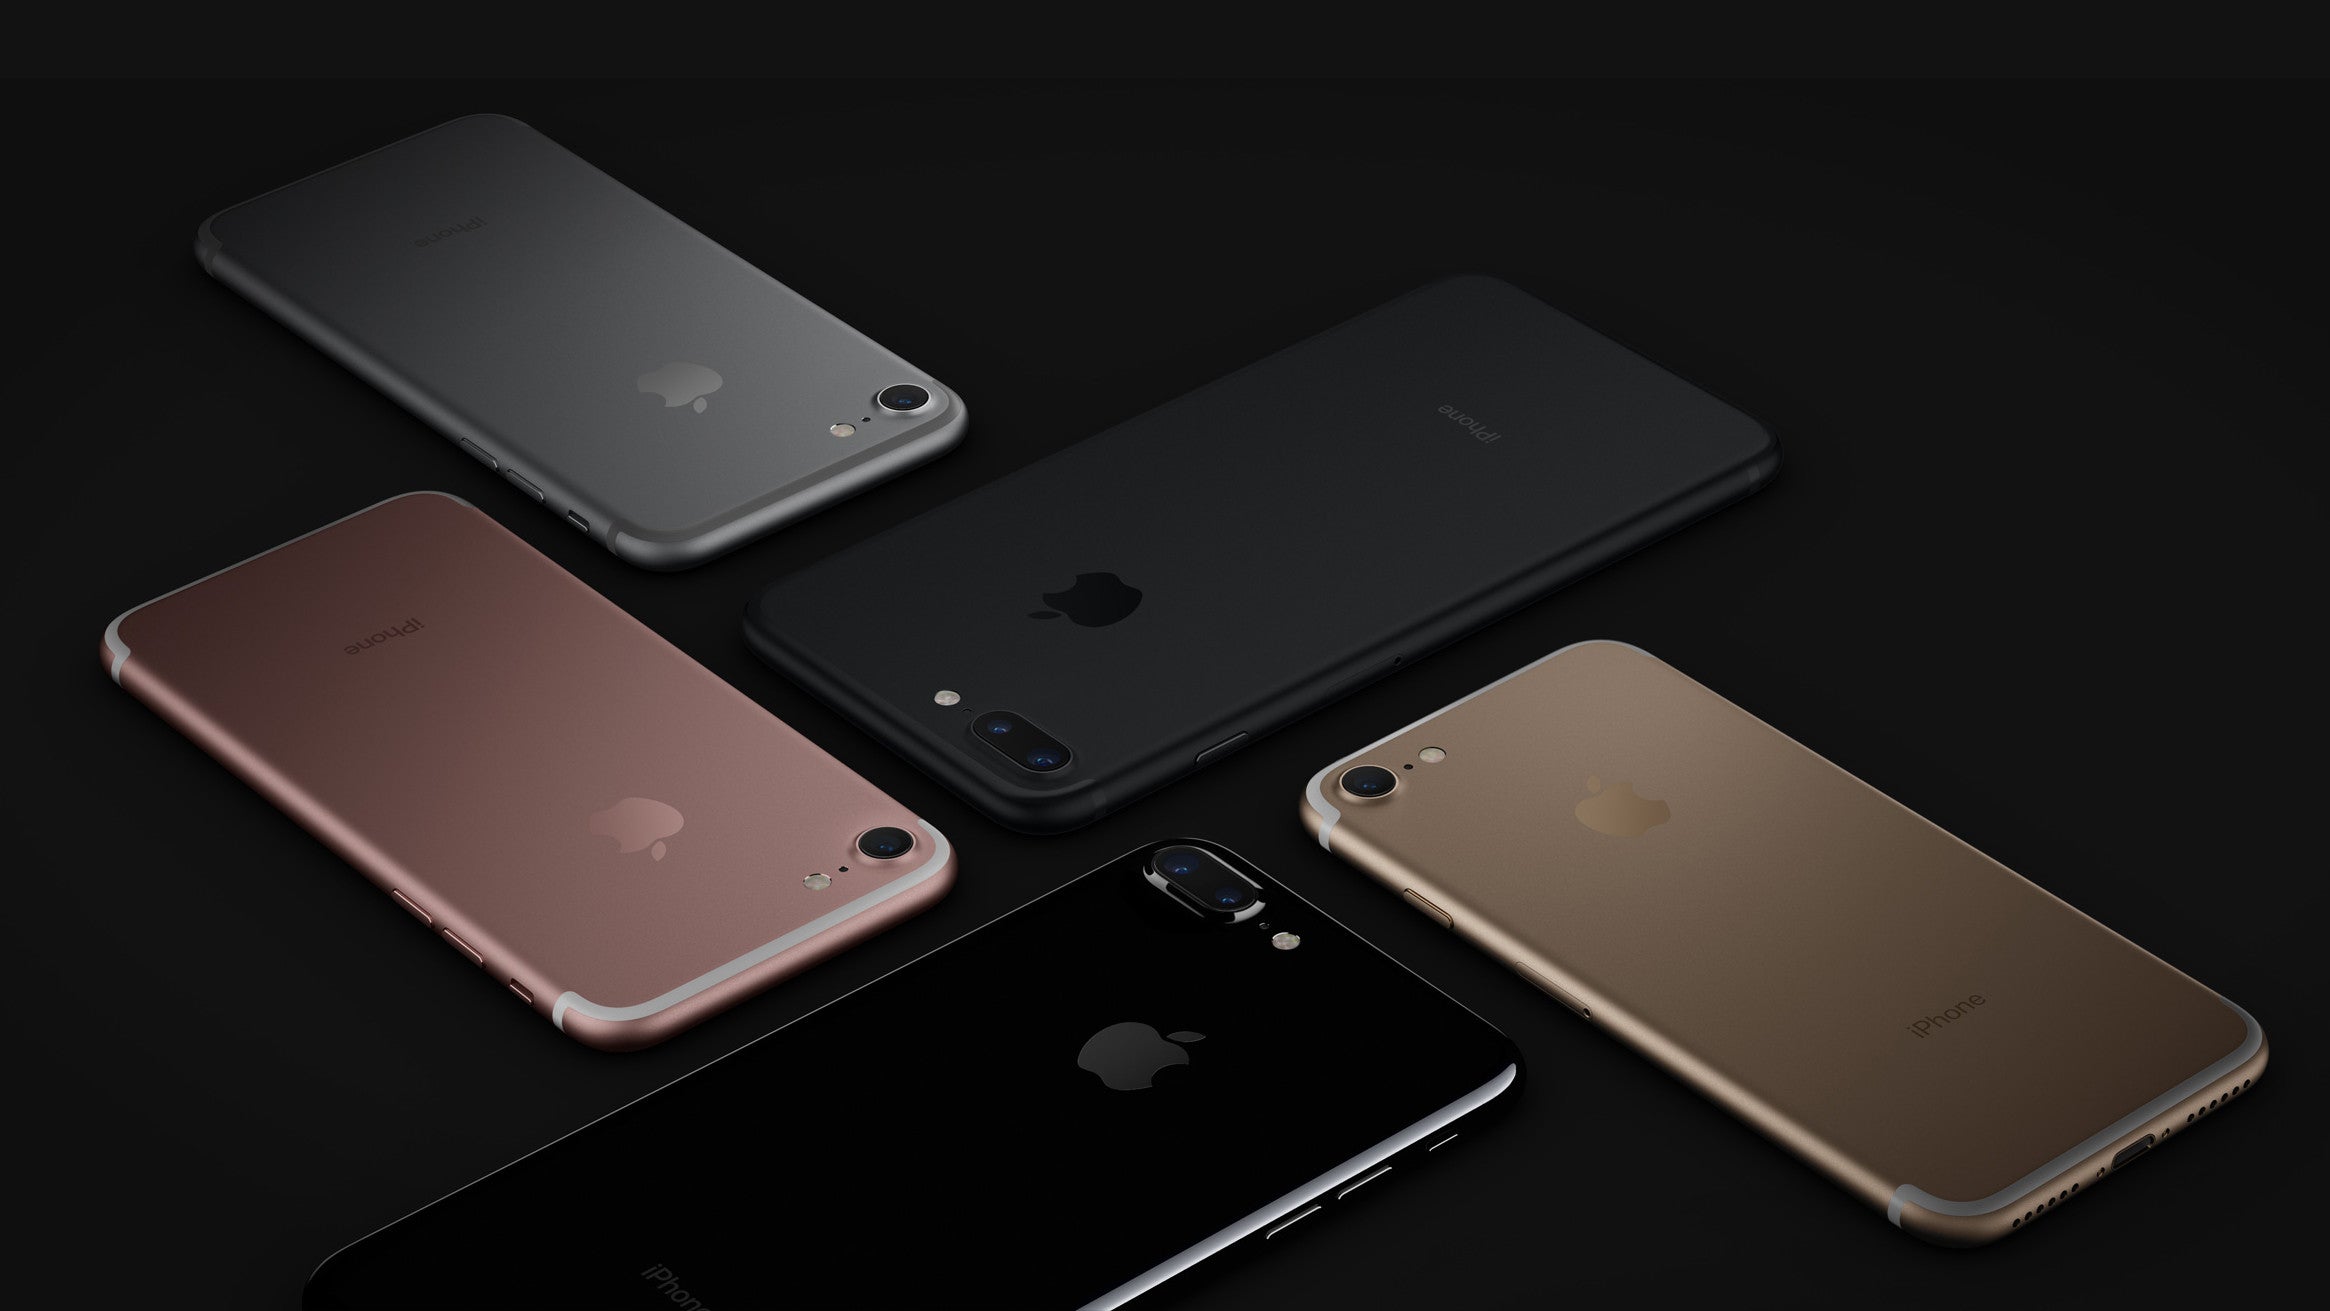 Boost and Virgin Mobile will have Apple's iPhone 7 on September 23 [UPDATED]